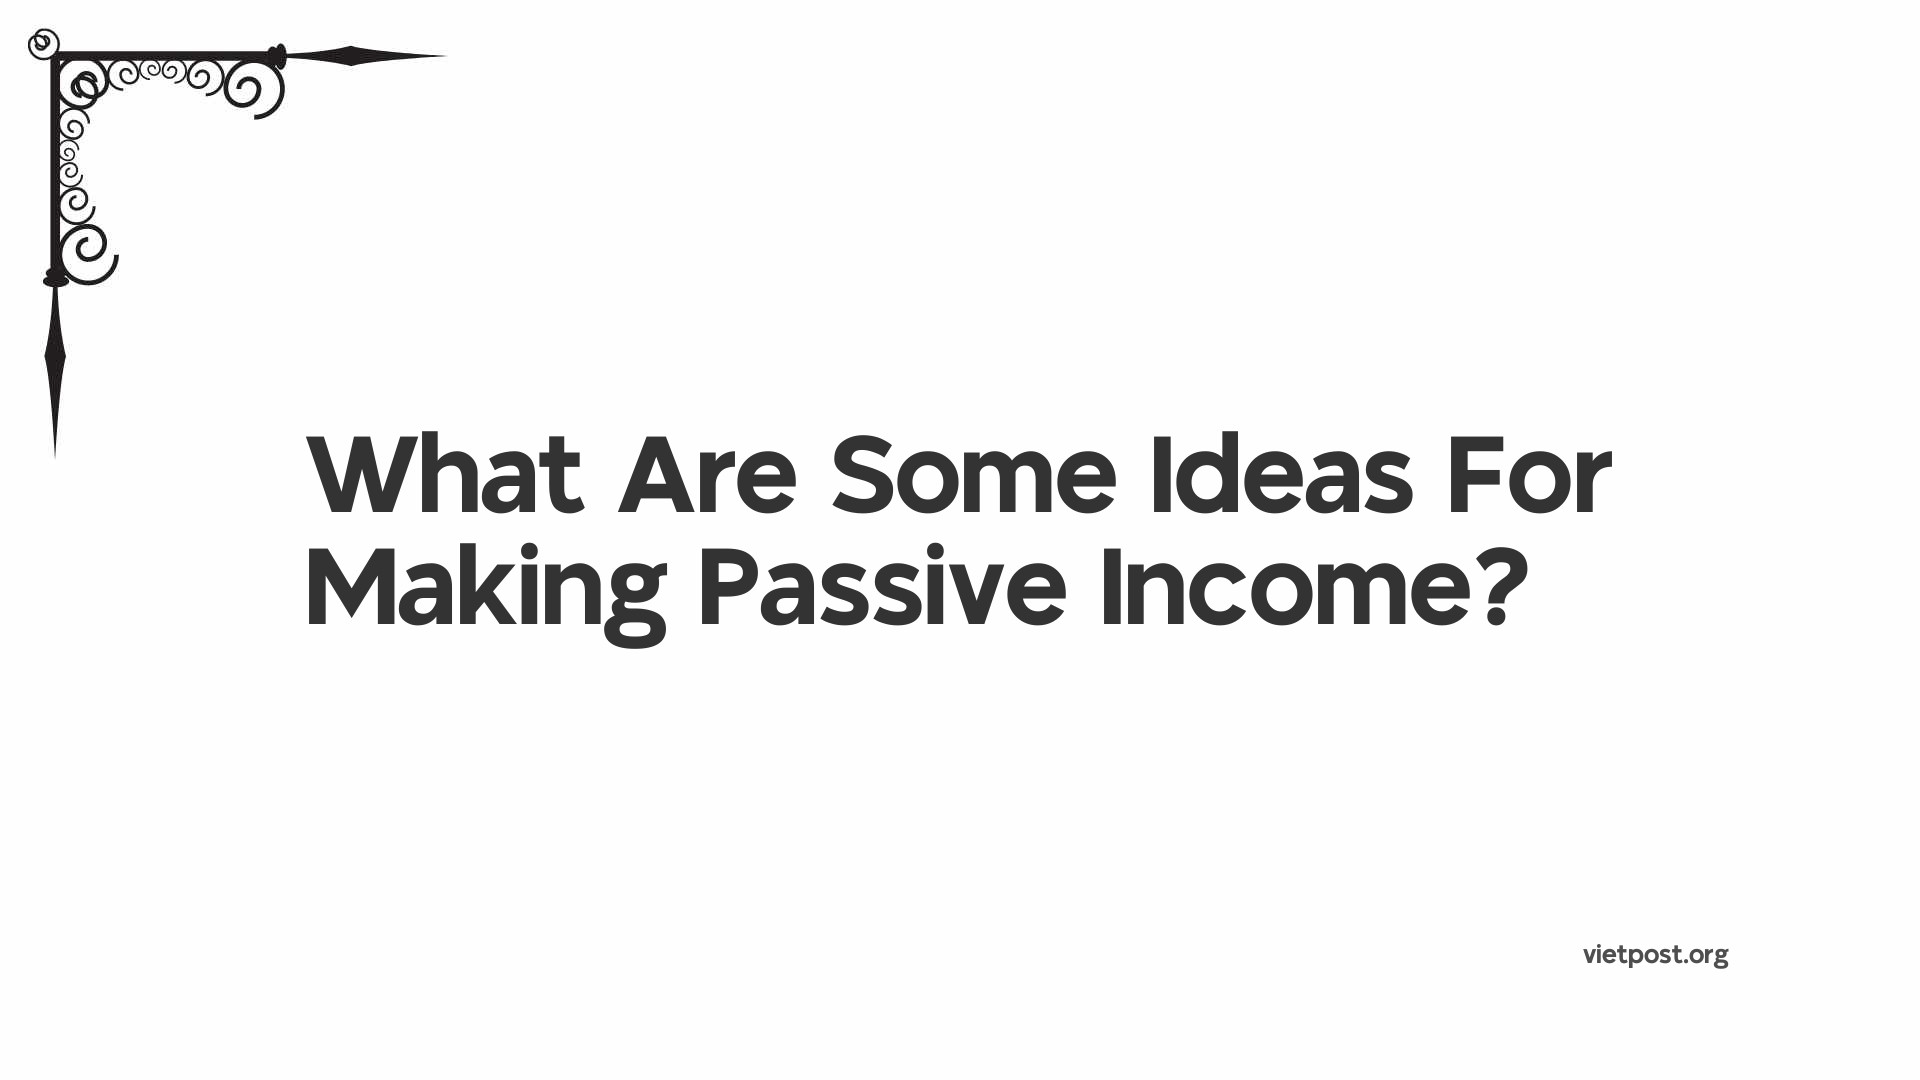 What Are Some Ideas For Making Passive Income?